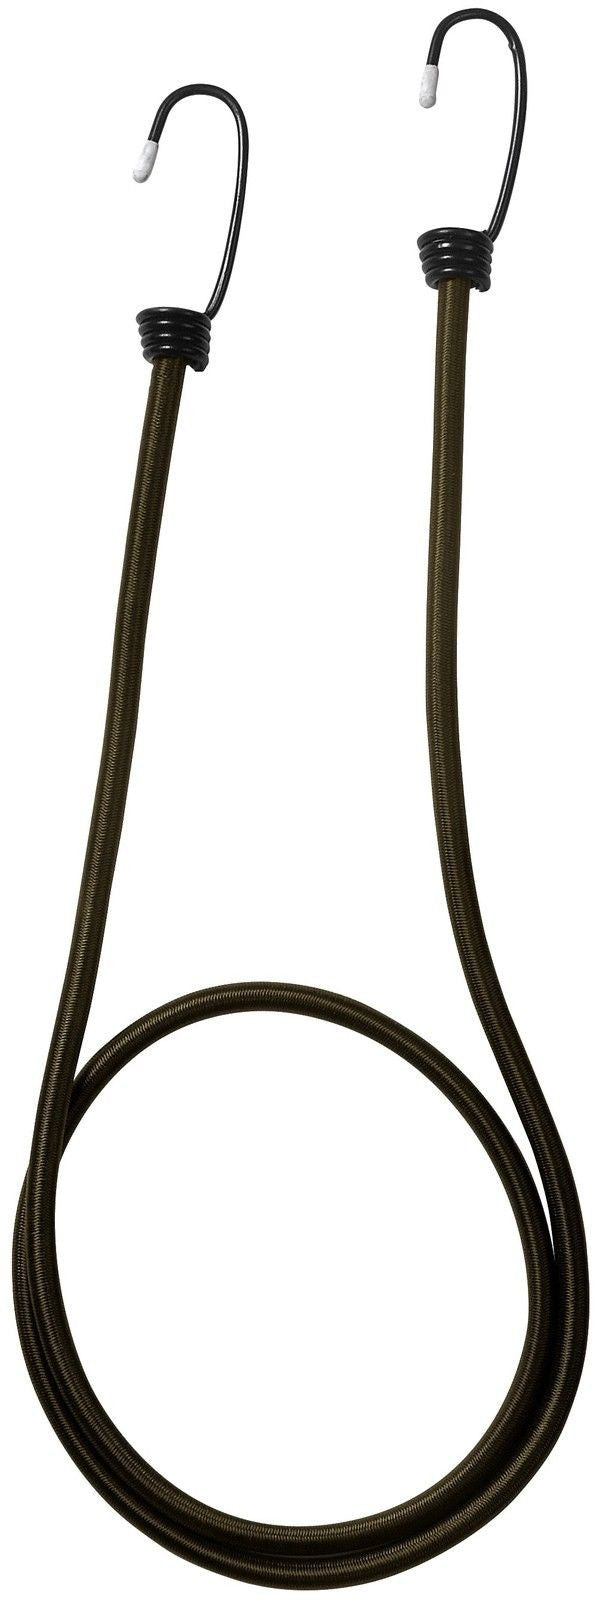 Rothco Deluxe Bungee Shock Cords - Olive Drab - 24 Inches